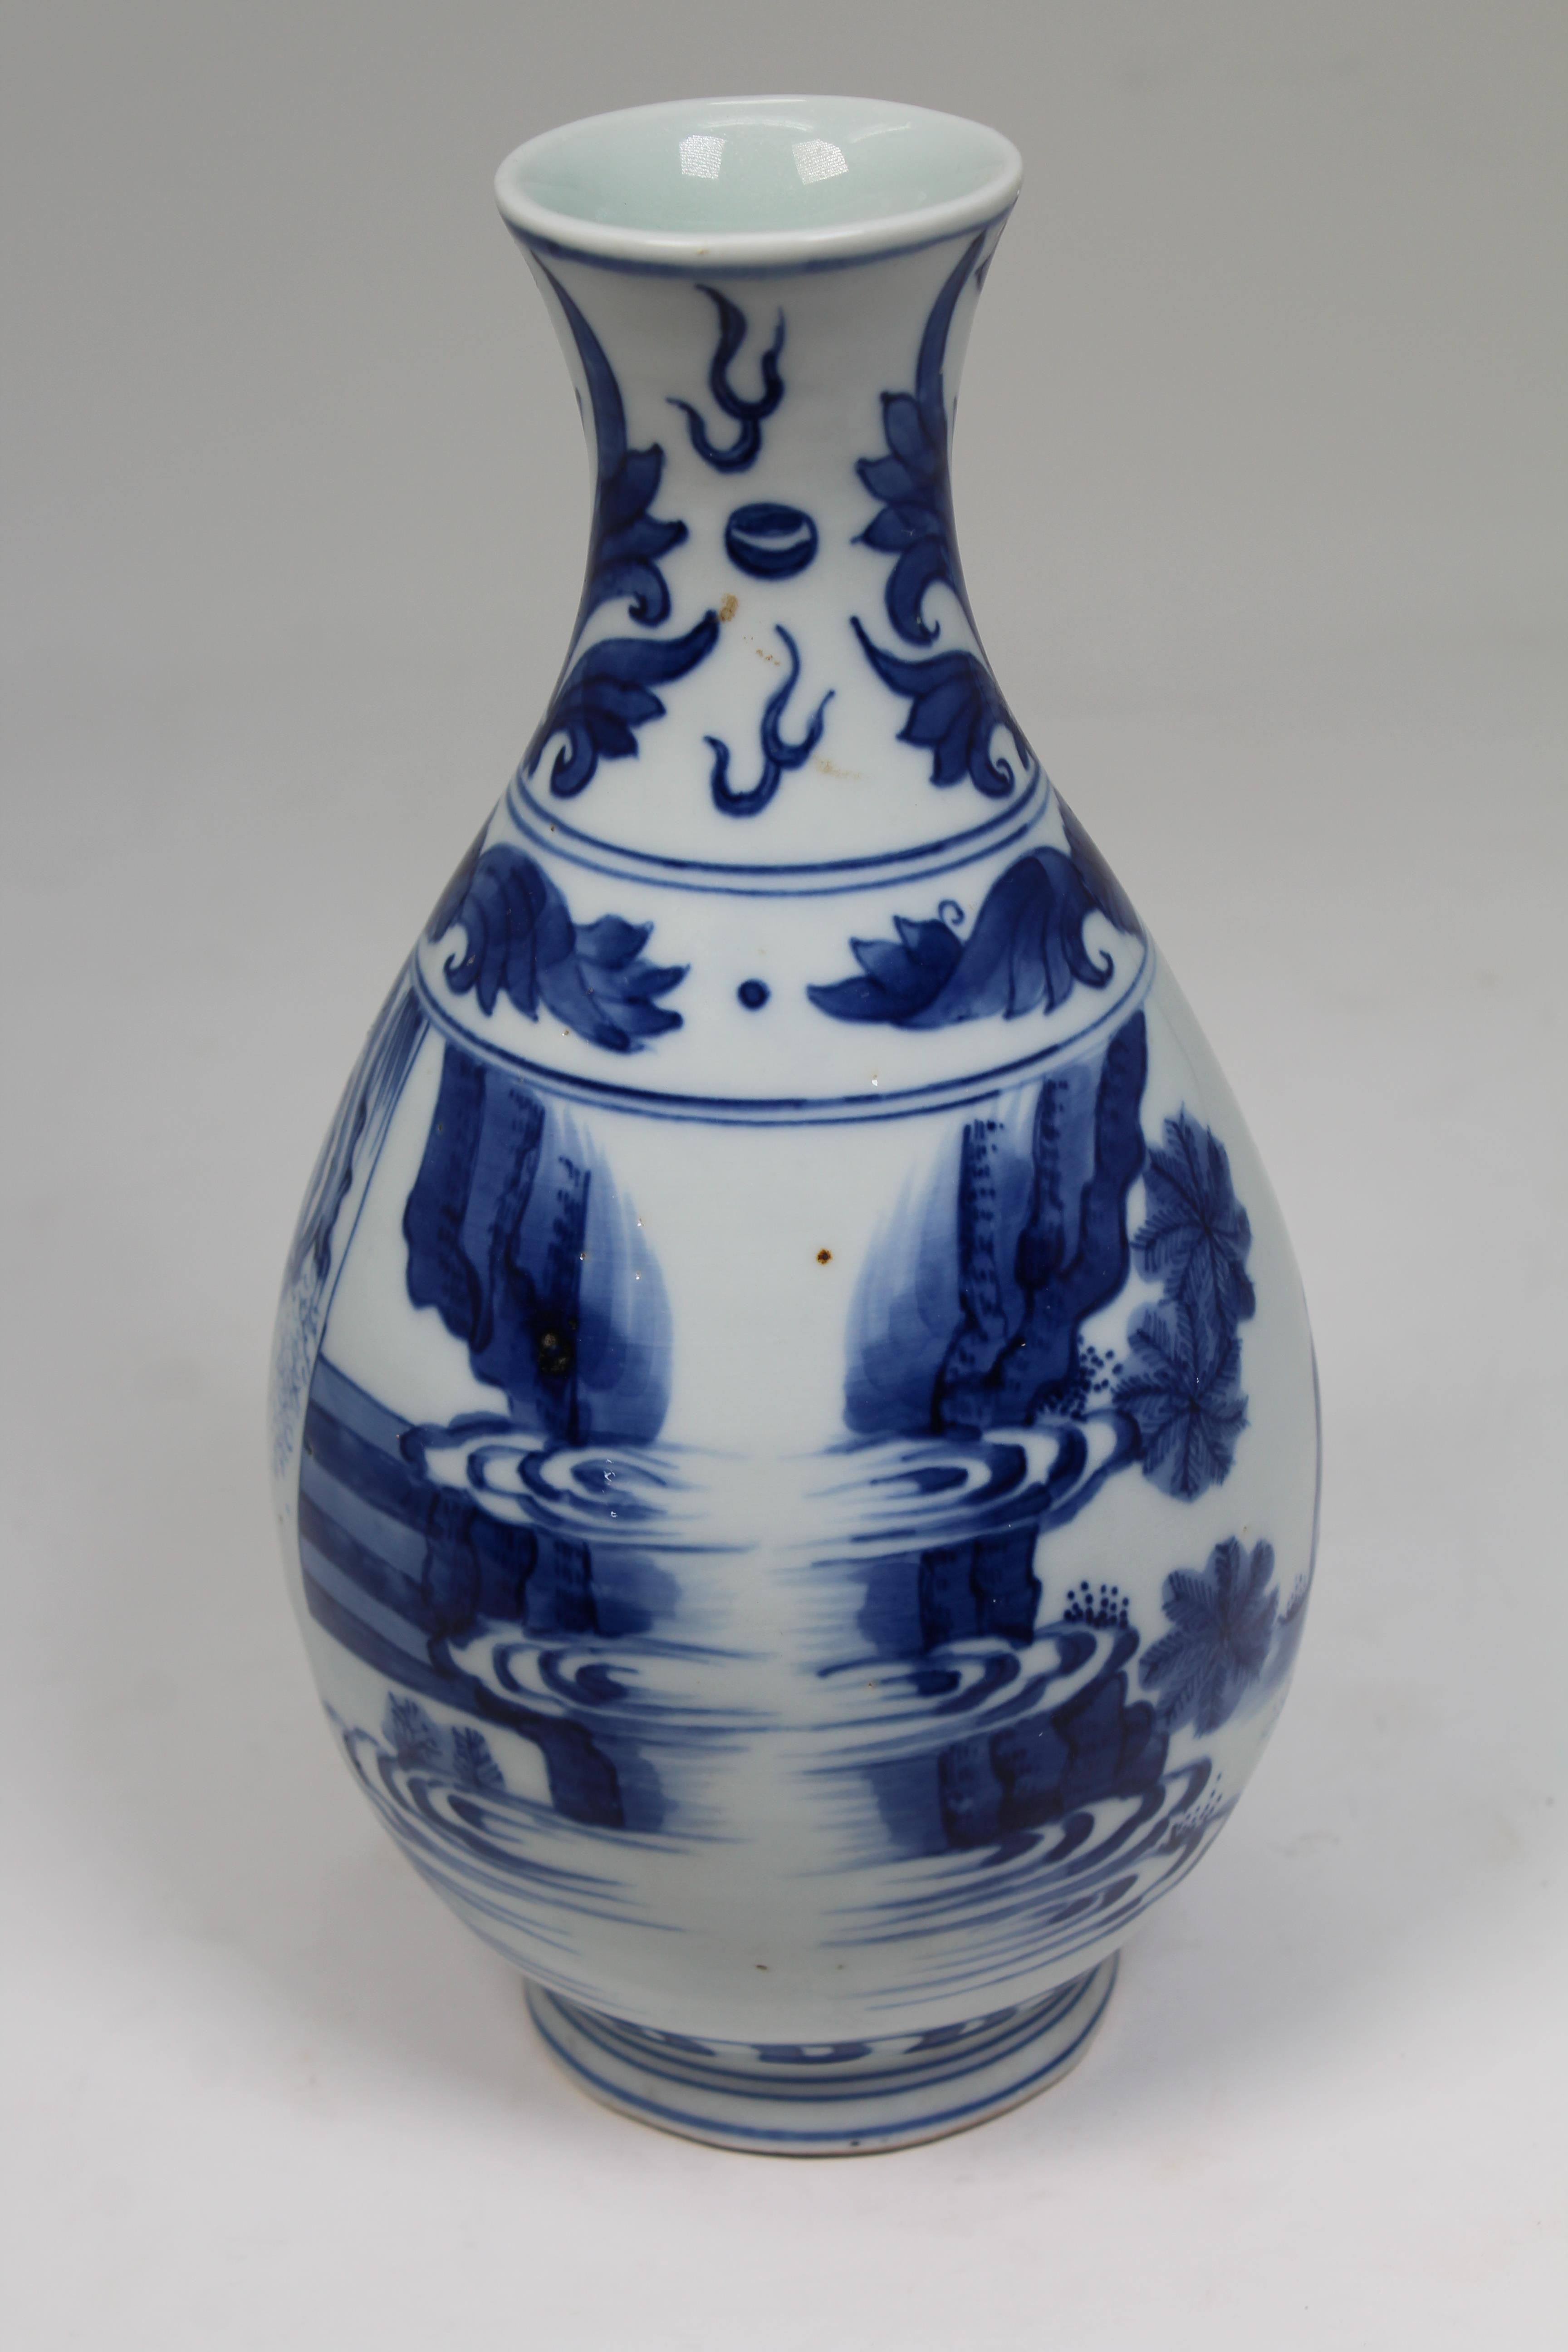 Chinese Blue/White Porcelain Vase. Scene depicts figures conversing. Size: 9 x 4.75 in. - Image 6 of 8